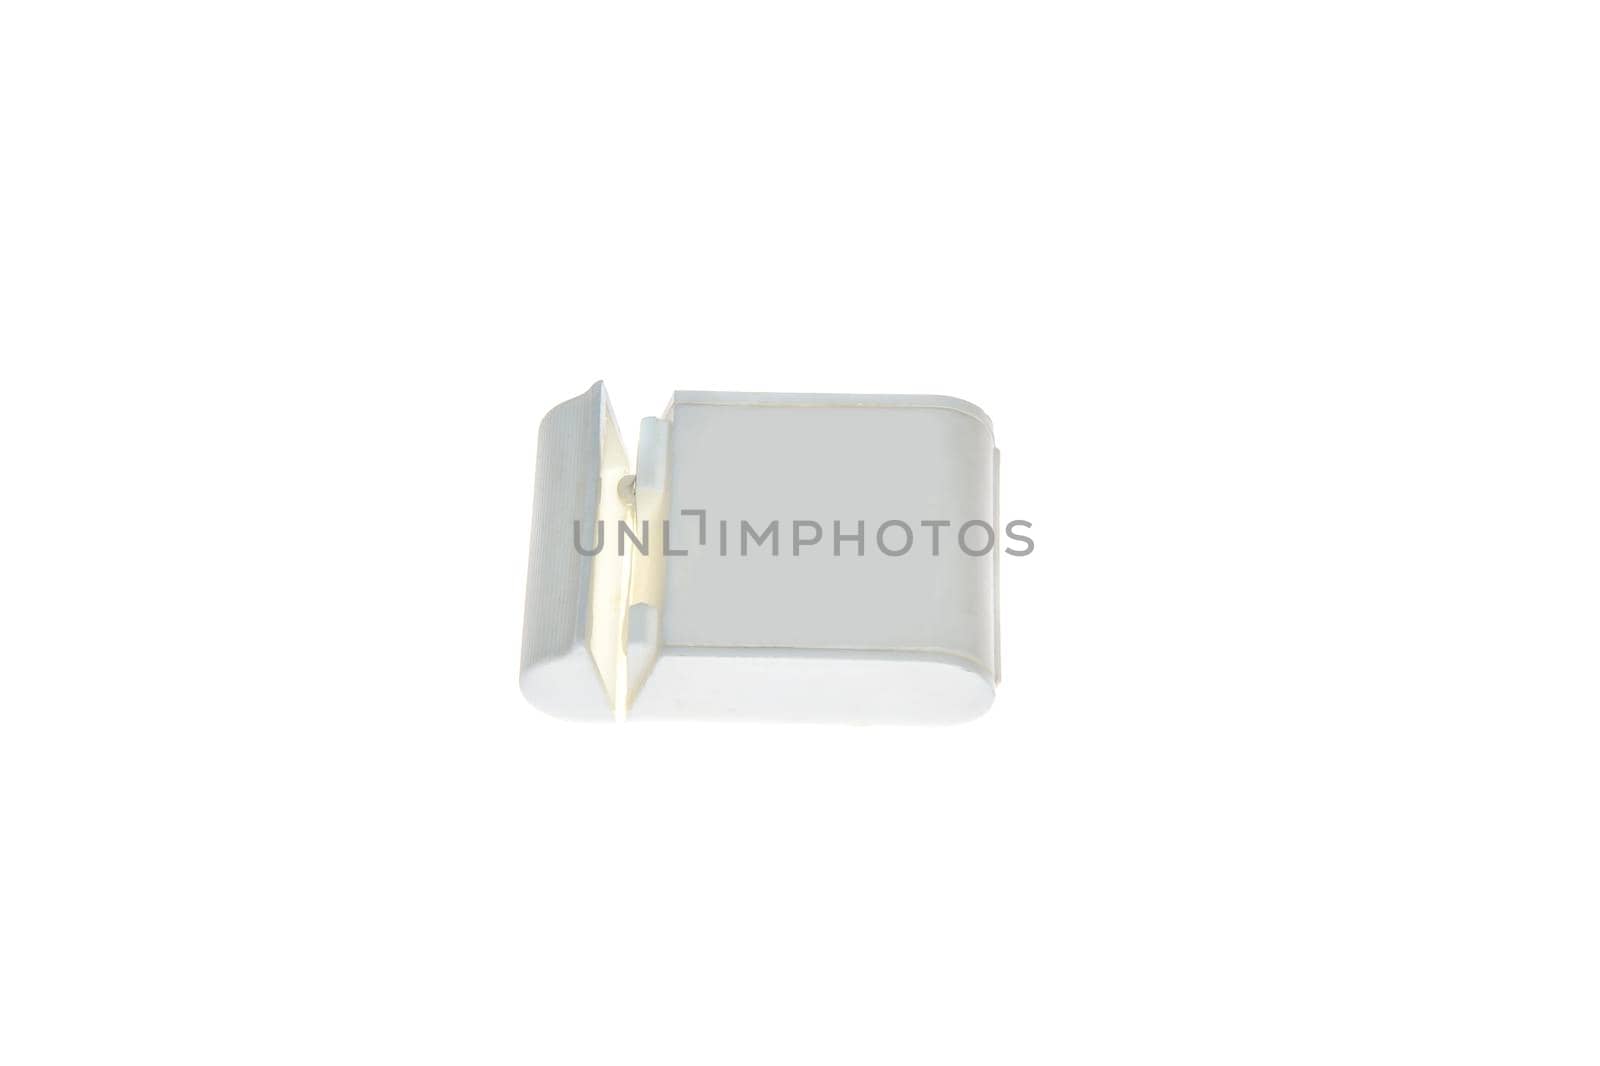 Dental Floss Hygiene Tool Box. Container With Floss Cord, Isolated on White